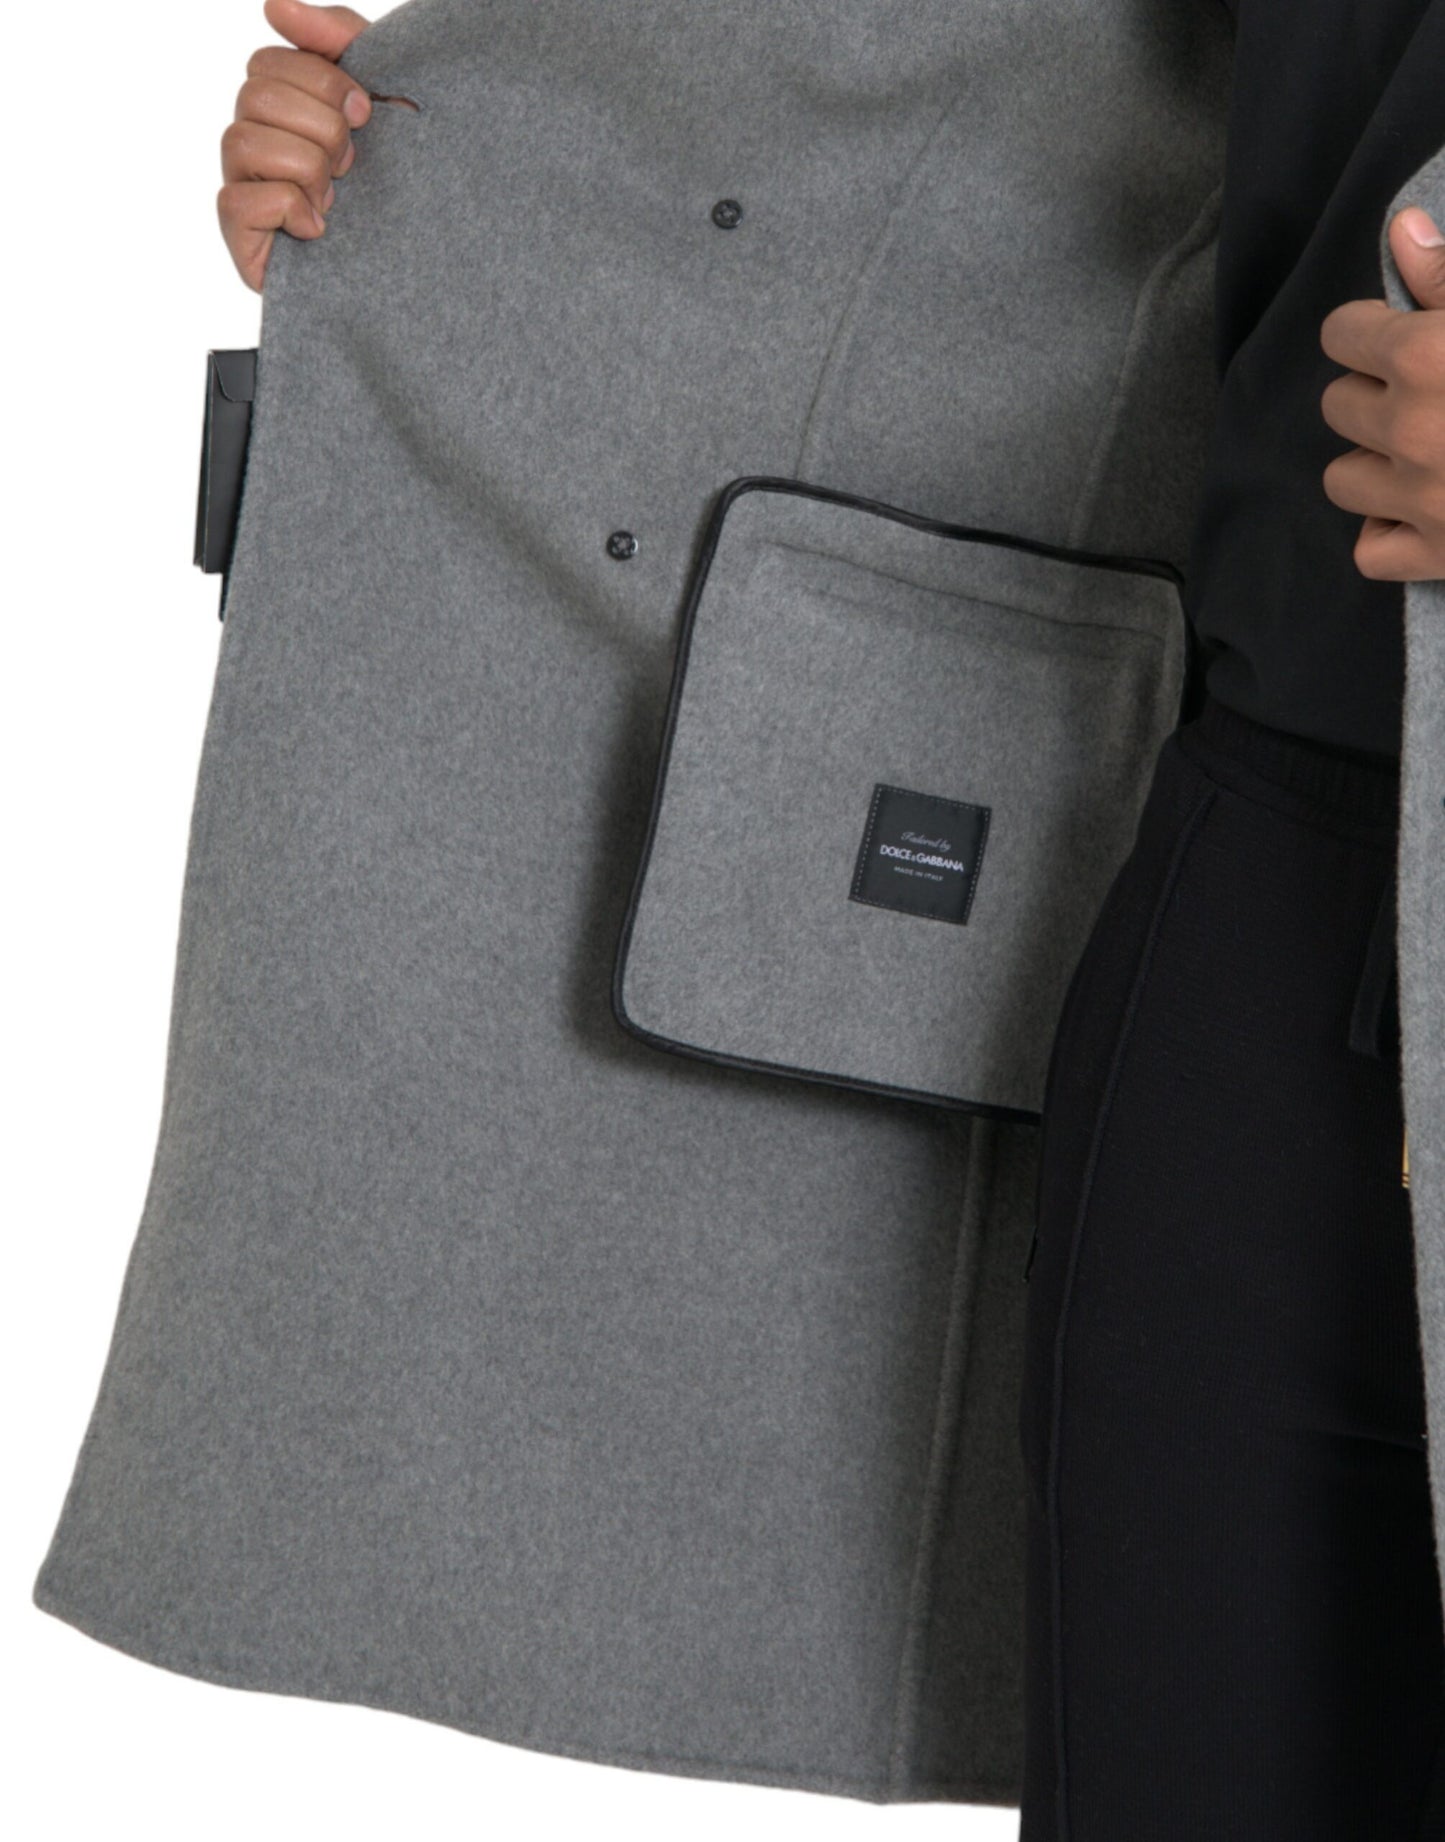 Gray Double Trench Coat Cashmere Jacket